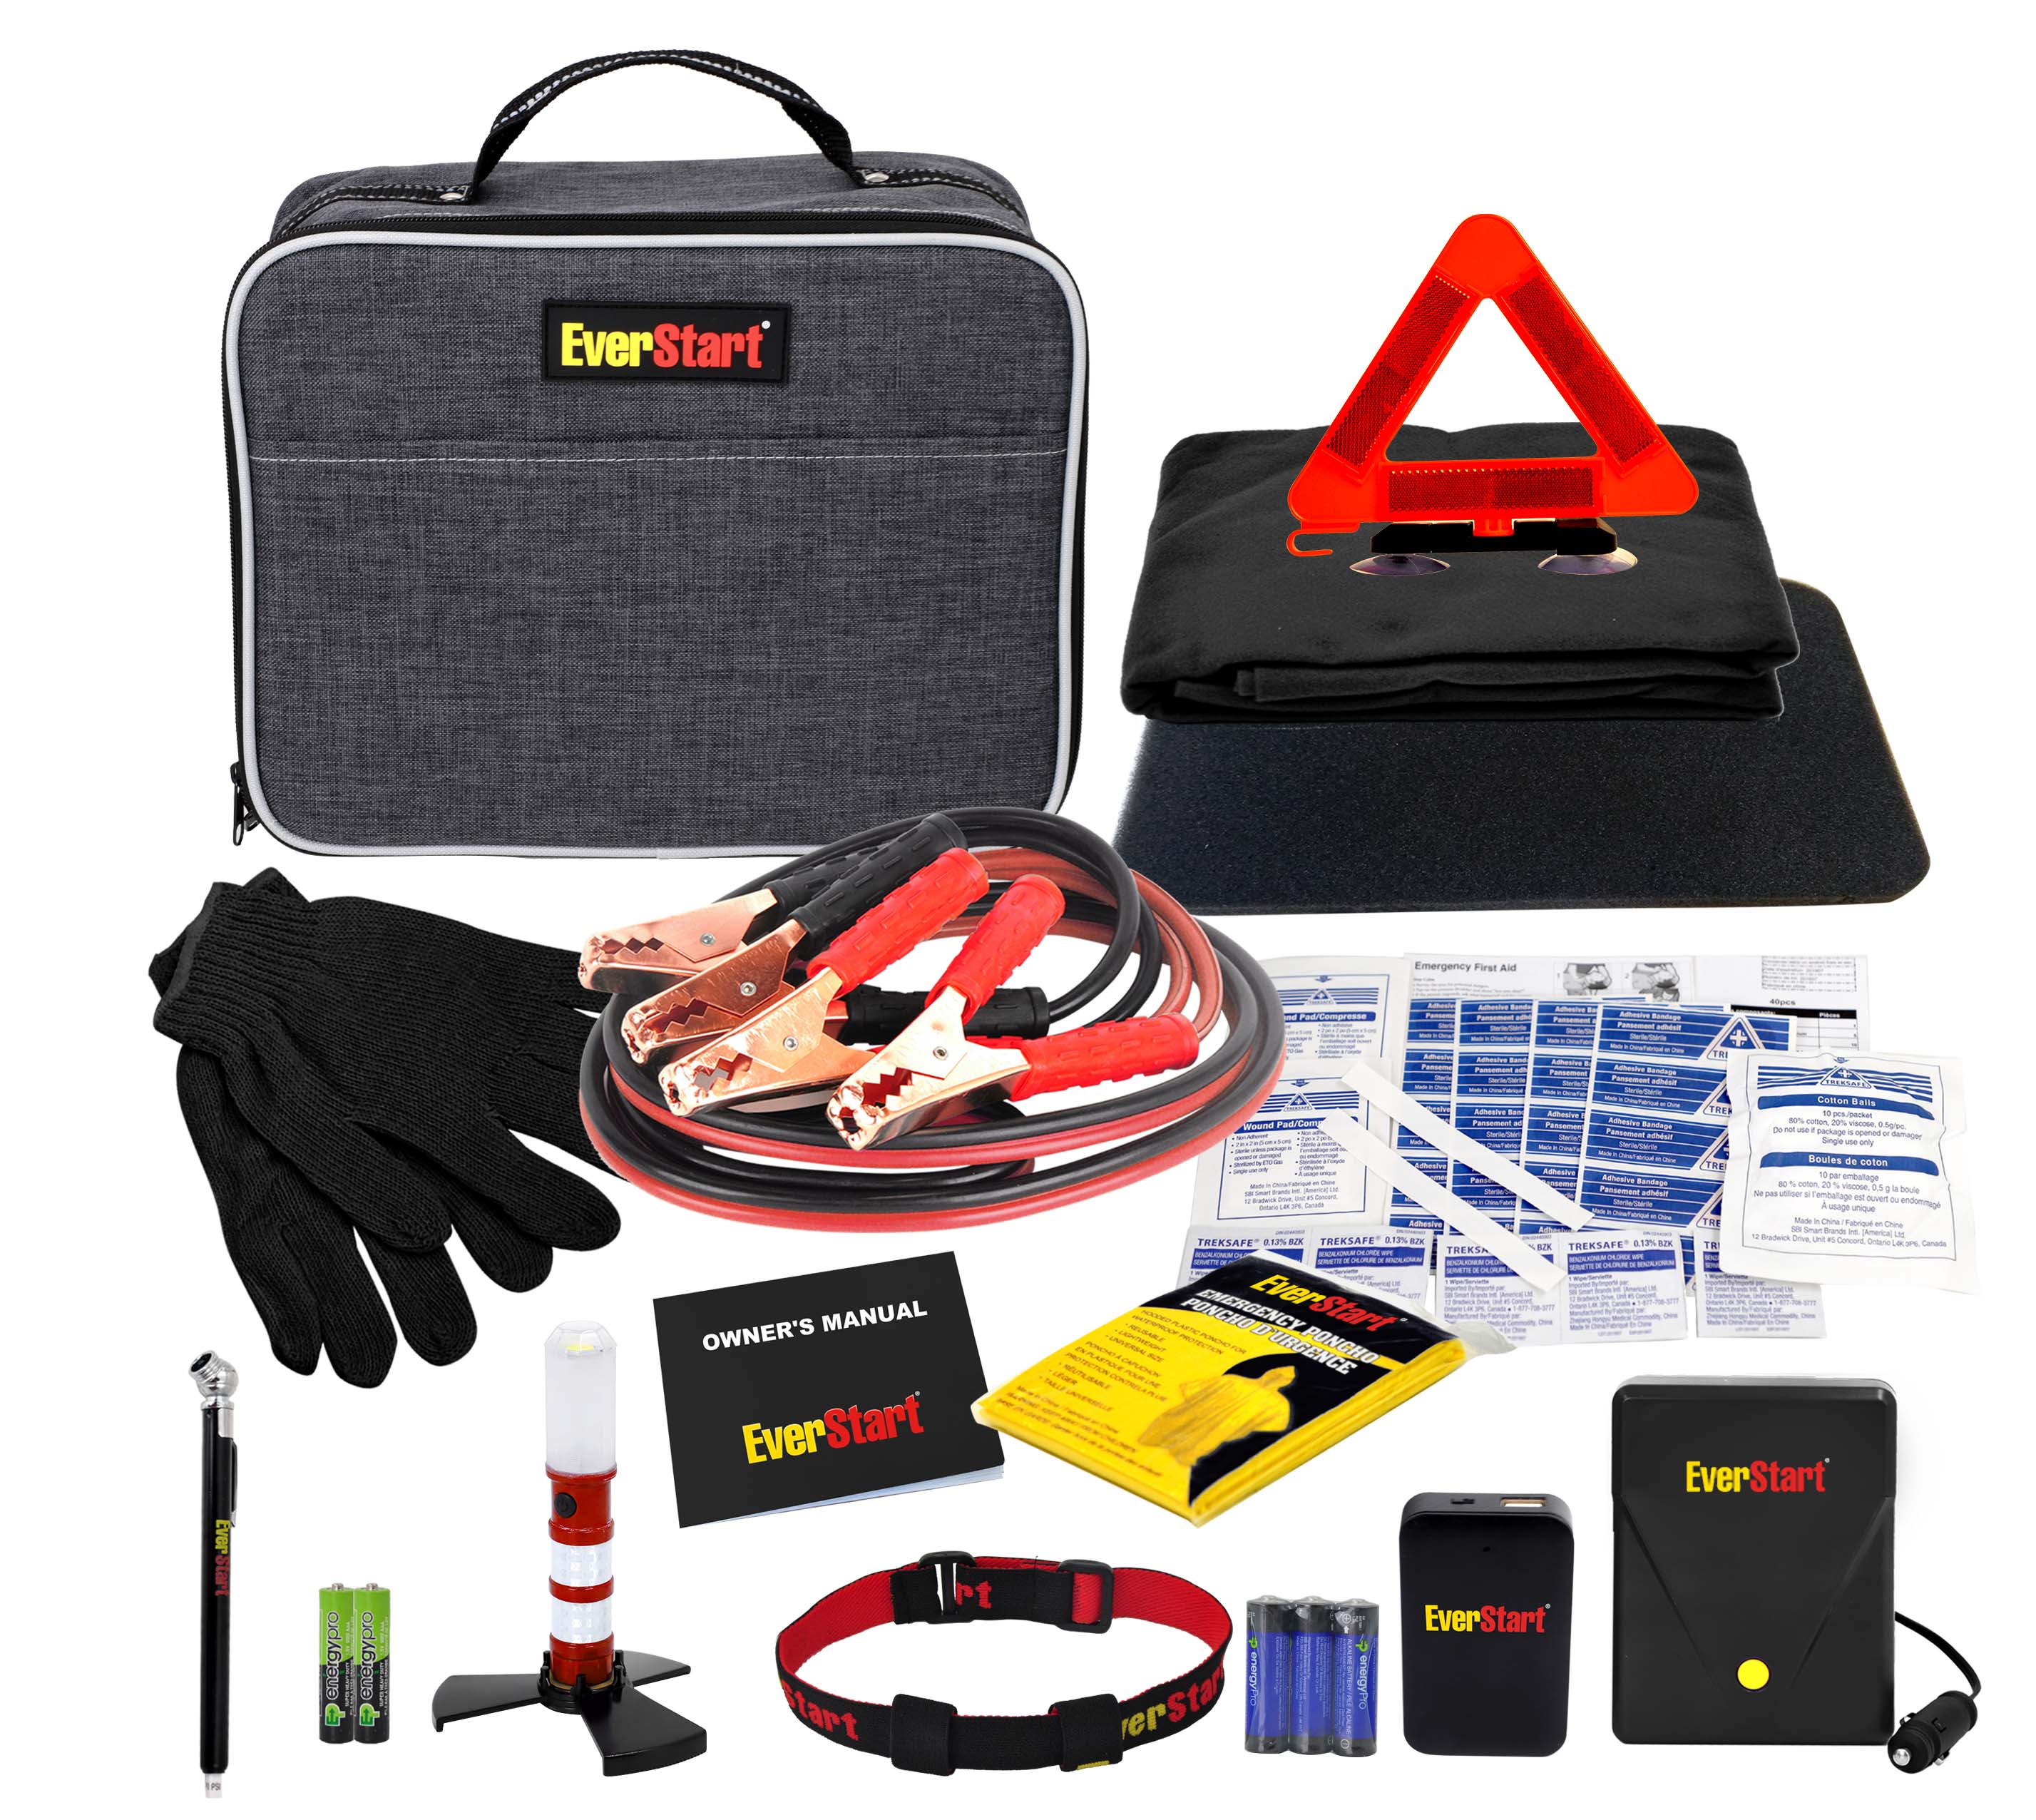 EverStart Roadside Safety Kit with Tire Inflator. Assembled Product Dimensions: 10in x 3in x 8in - image 1 of 11